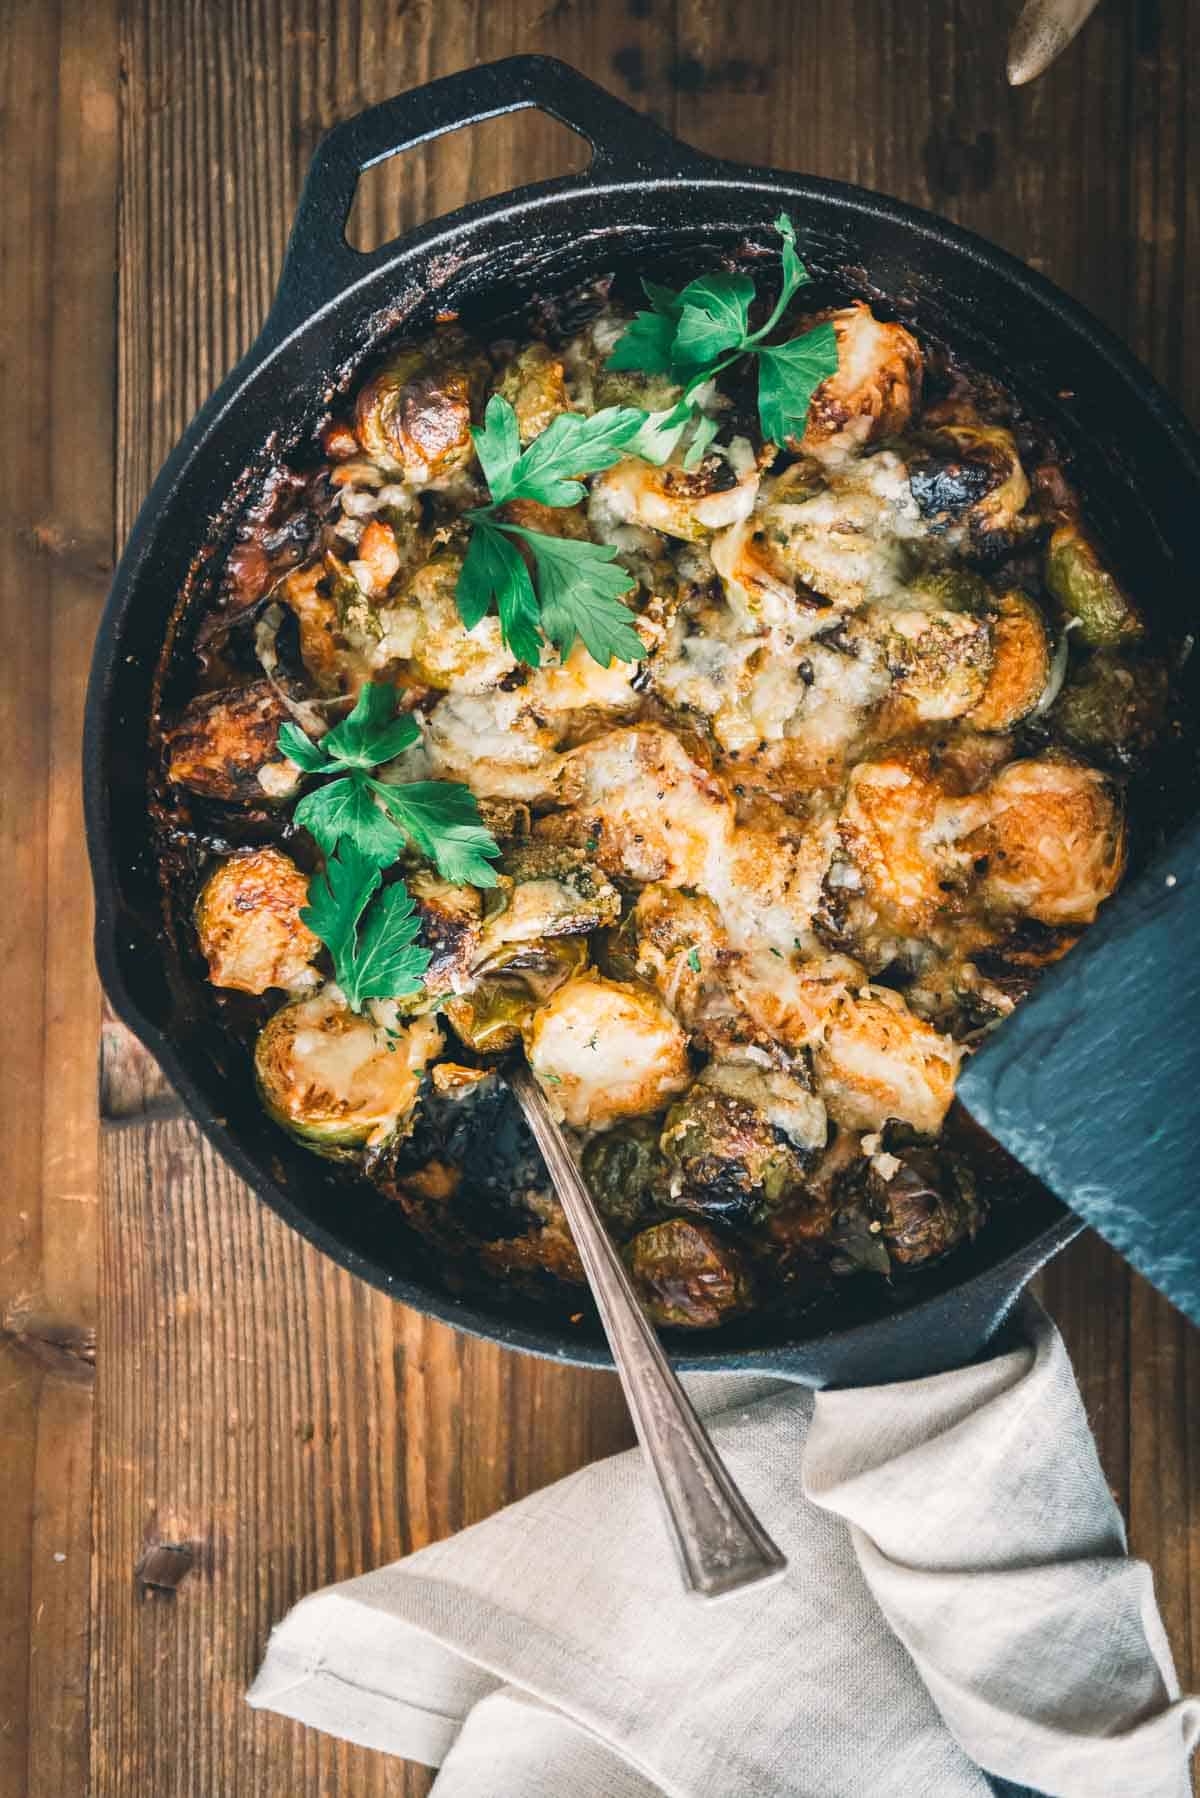 A skillet filled with brussels sprouts and cheese.